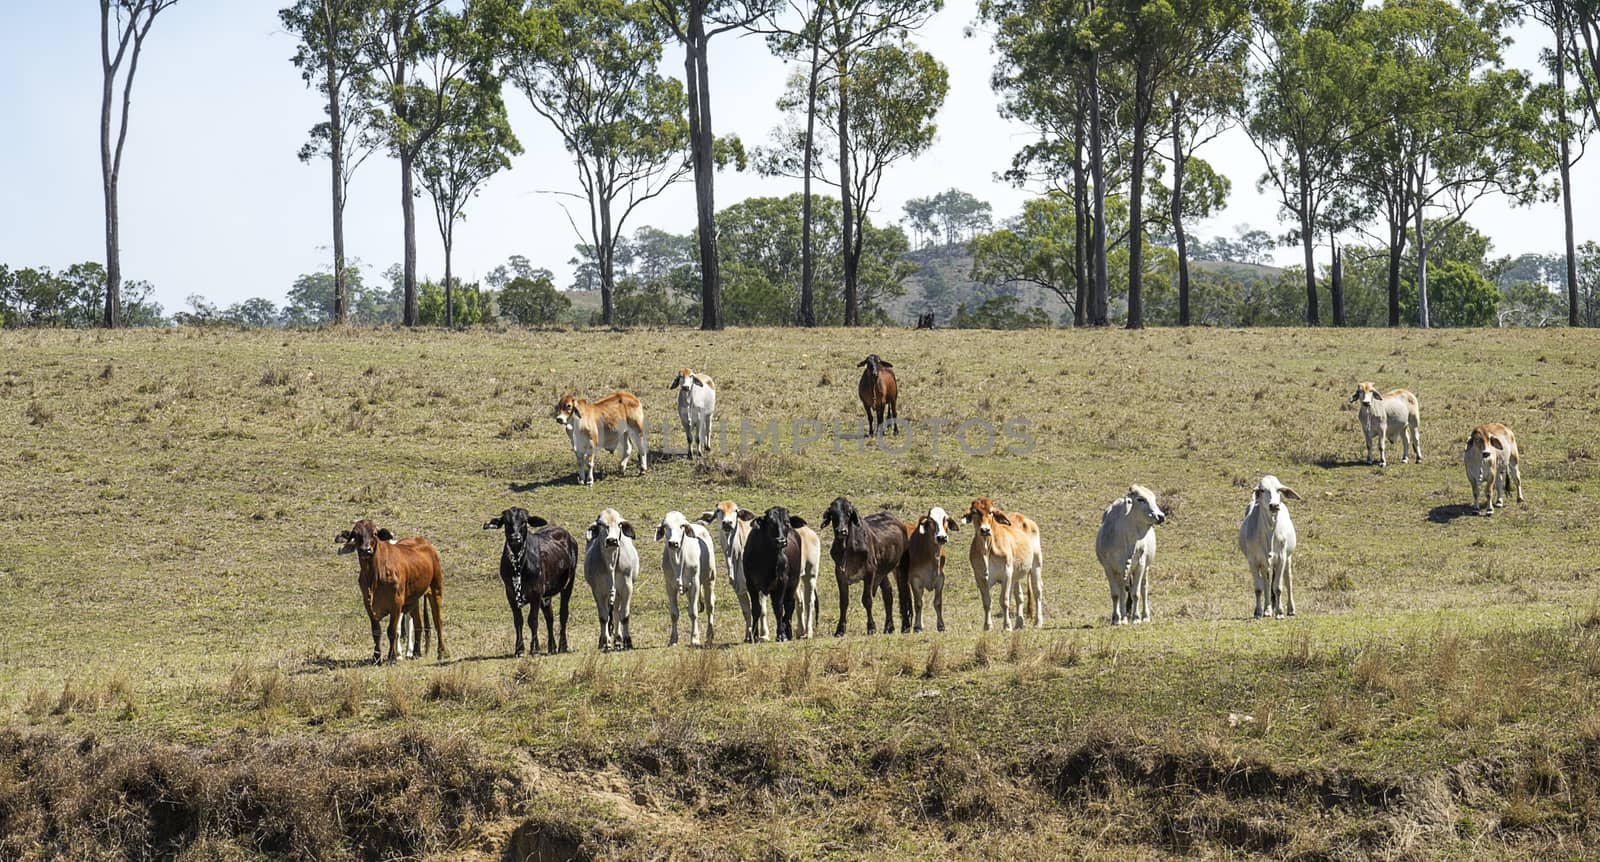 Herd of cows on a ranch in rural Australia